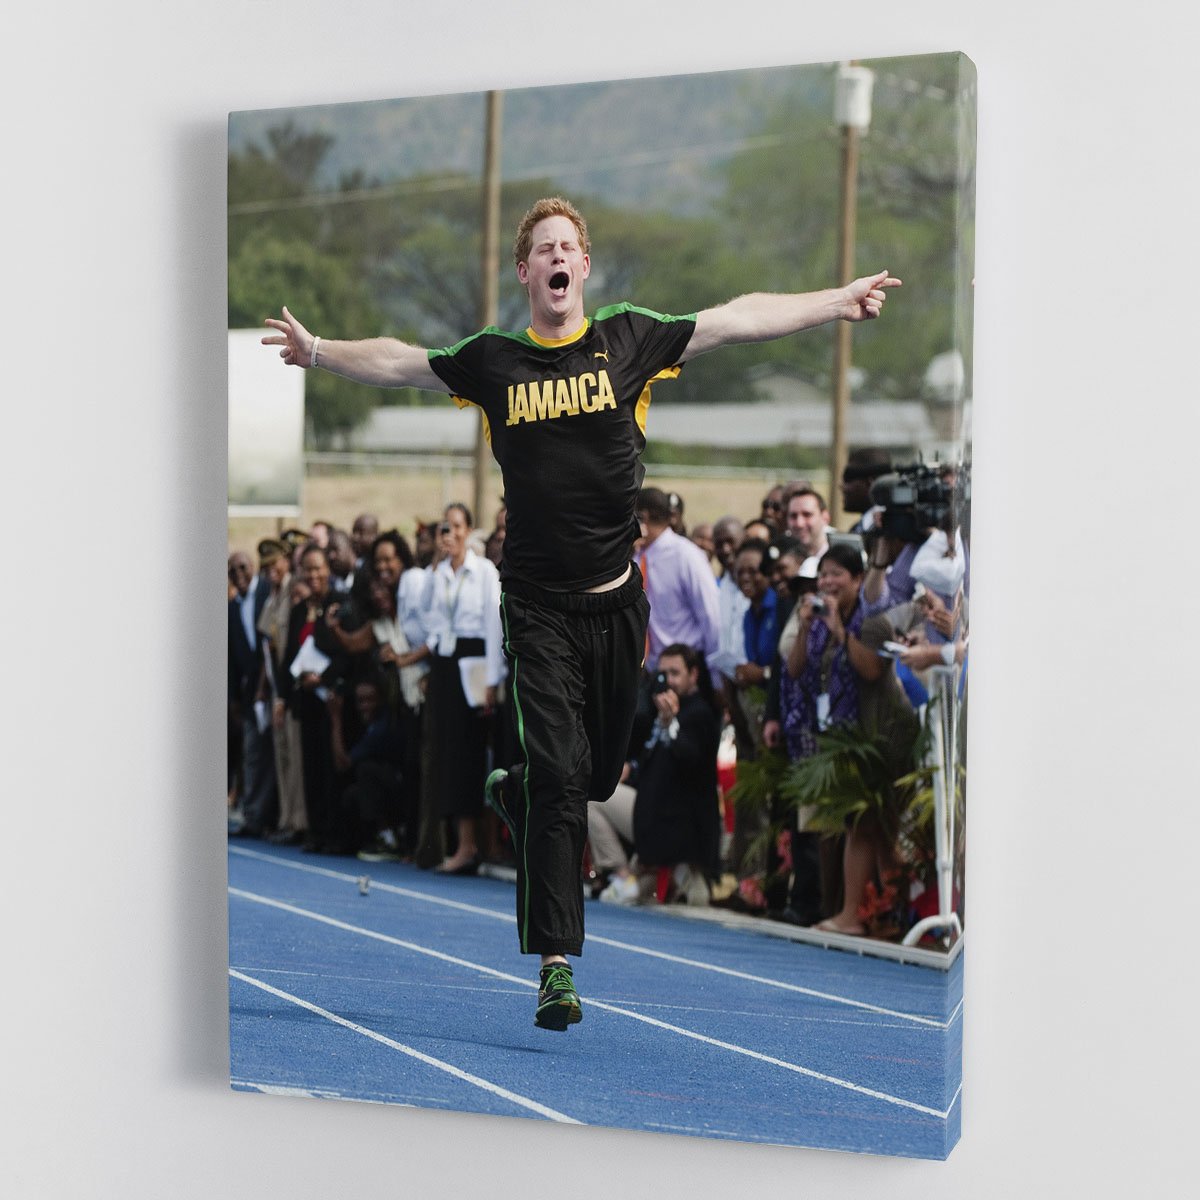 Prince Harry racing in Kingston Jamaica Canvas Print or Poster